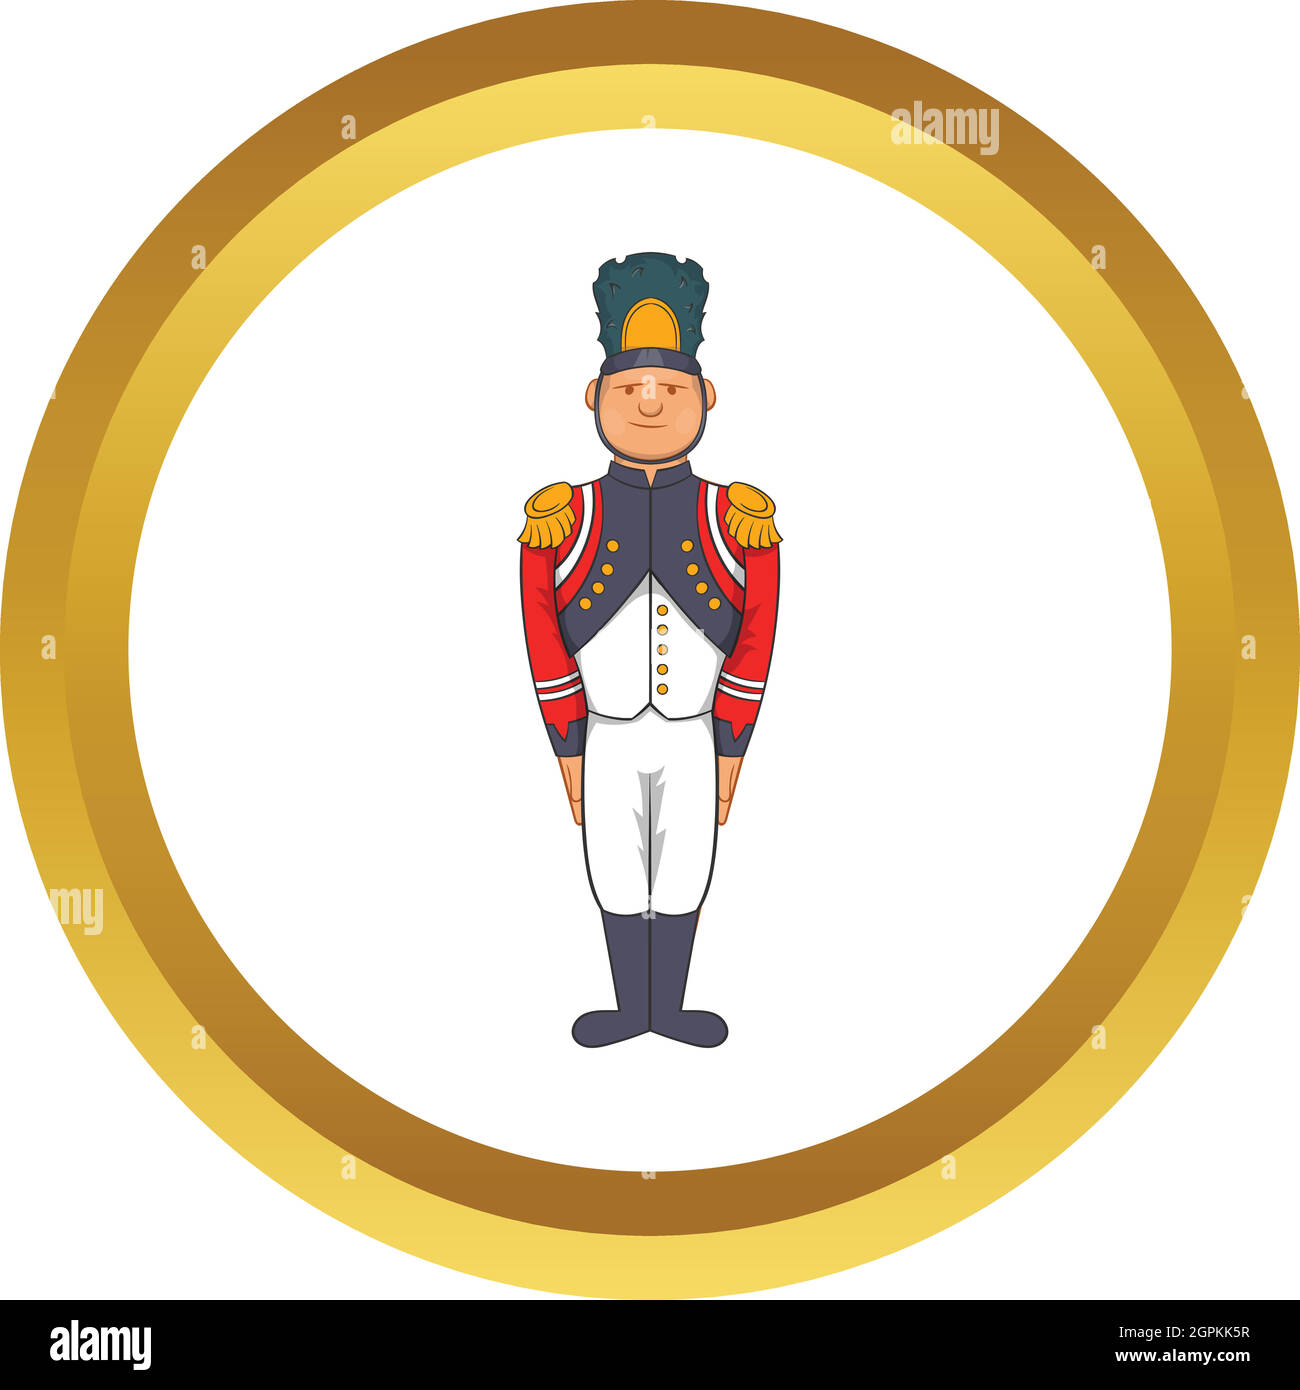 French Army soldier in uniform vector icon Stock Vector